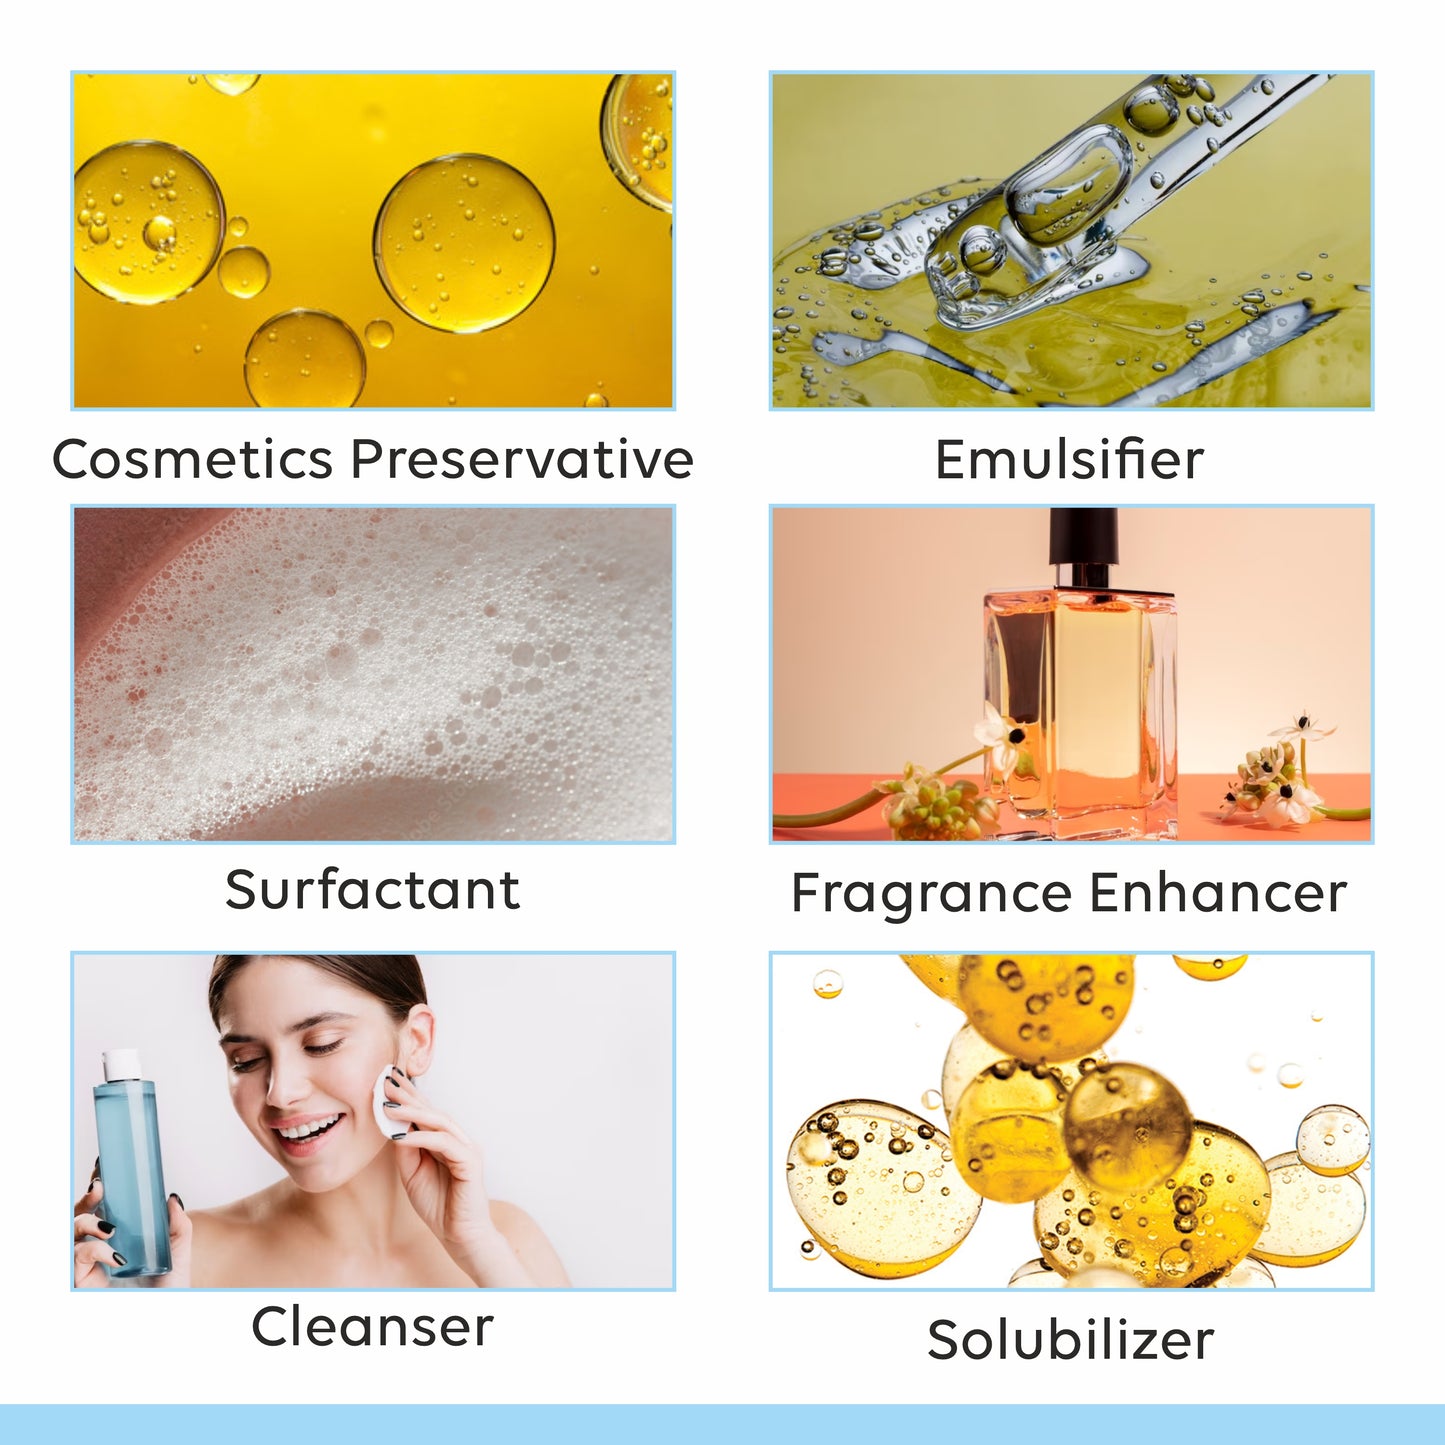 cosmeticmaking, saopmaking, cosmeticmakingingredients, soapmakingingredients,cosmeticingredients,naturalingredients,organicingredients,veganingredients, essentialoils,fragranceoils,carrieroils, carrieroils, butters, clays,botanicals,herbs,preservatives,emulsifiers,surfa ctants,thickeners, thickeners,exfoliants, polysorbate 60